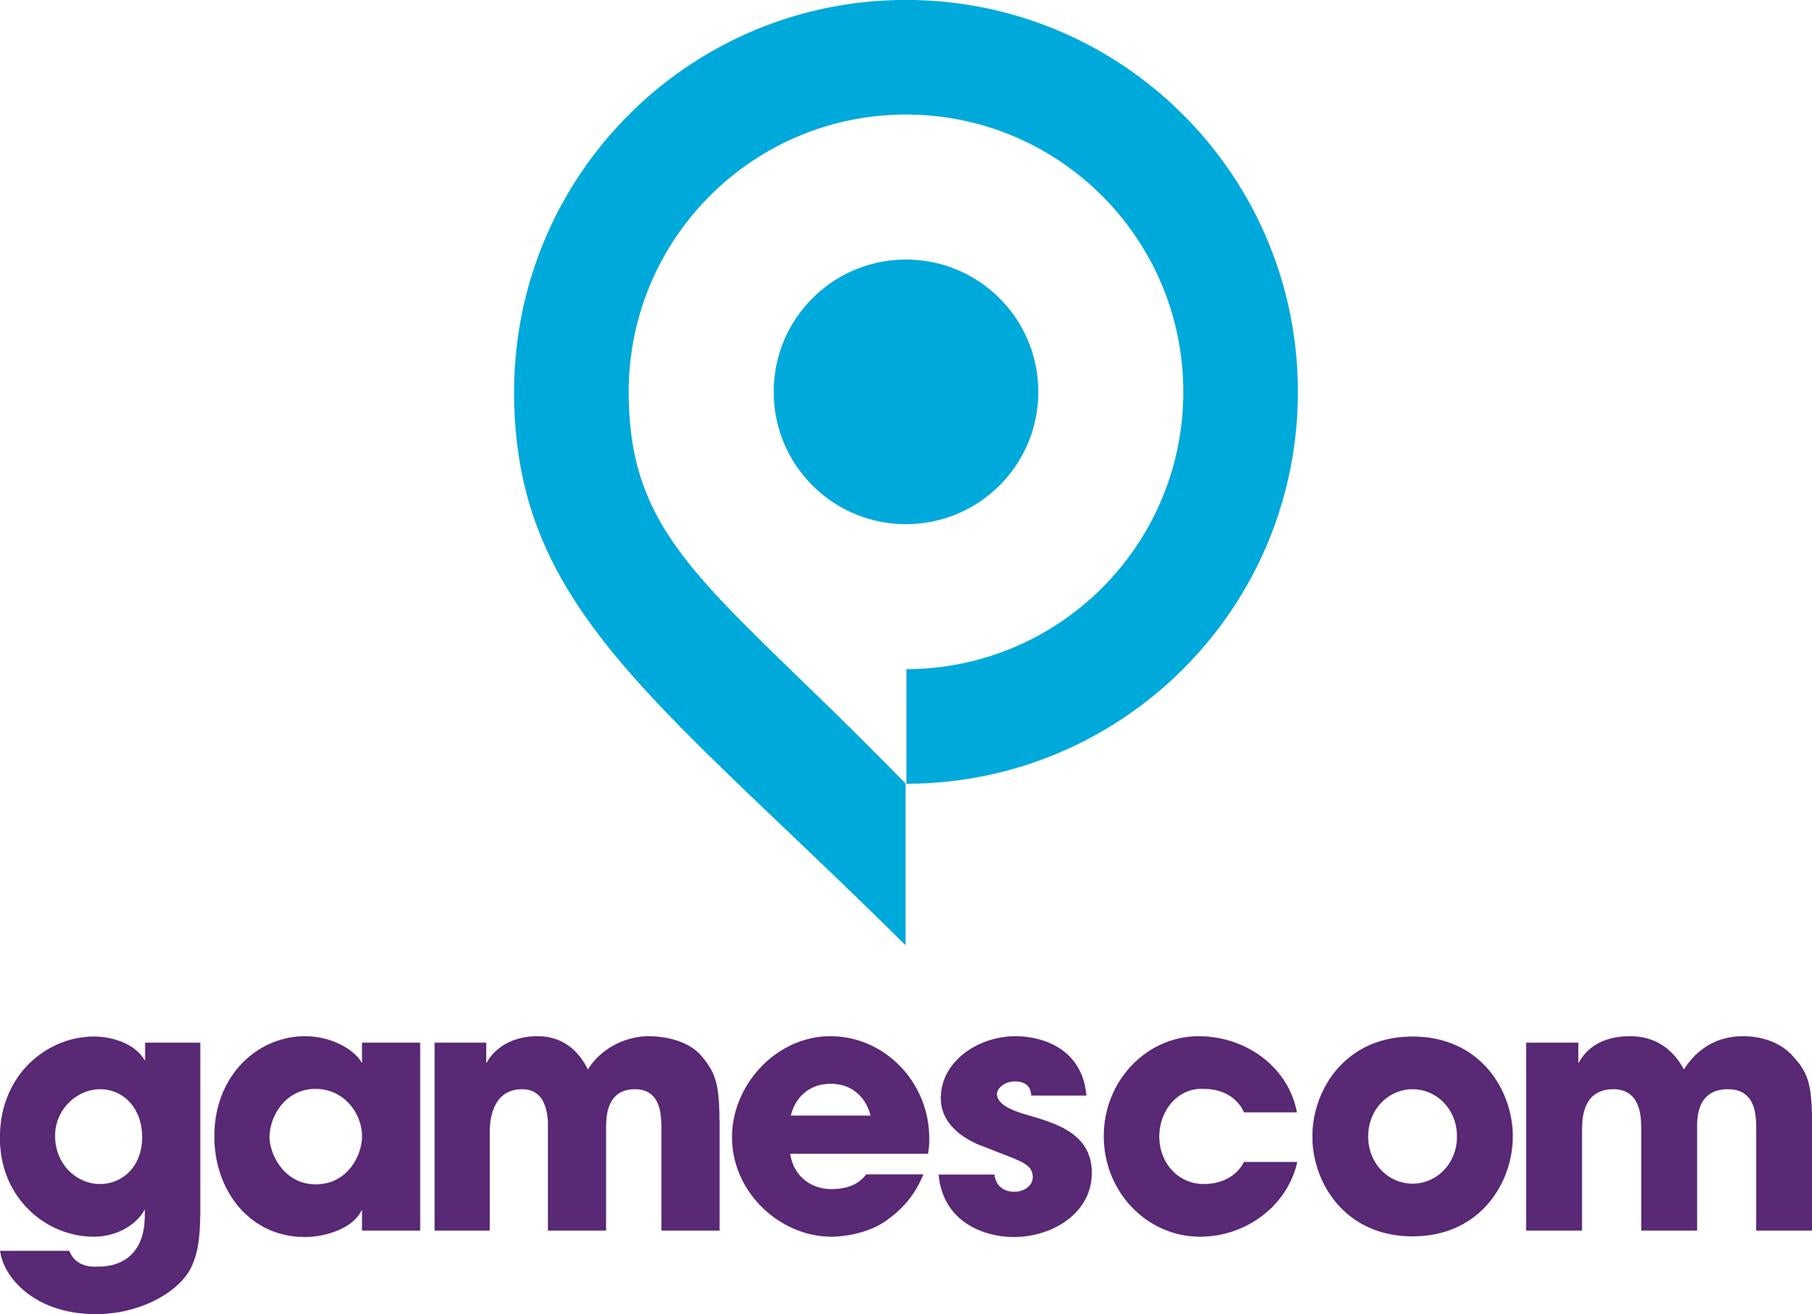 Image for Gamescom 2022 will be a physical event with an “extensive” online offering